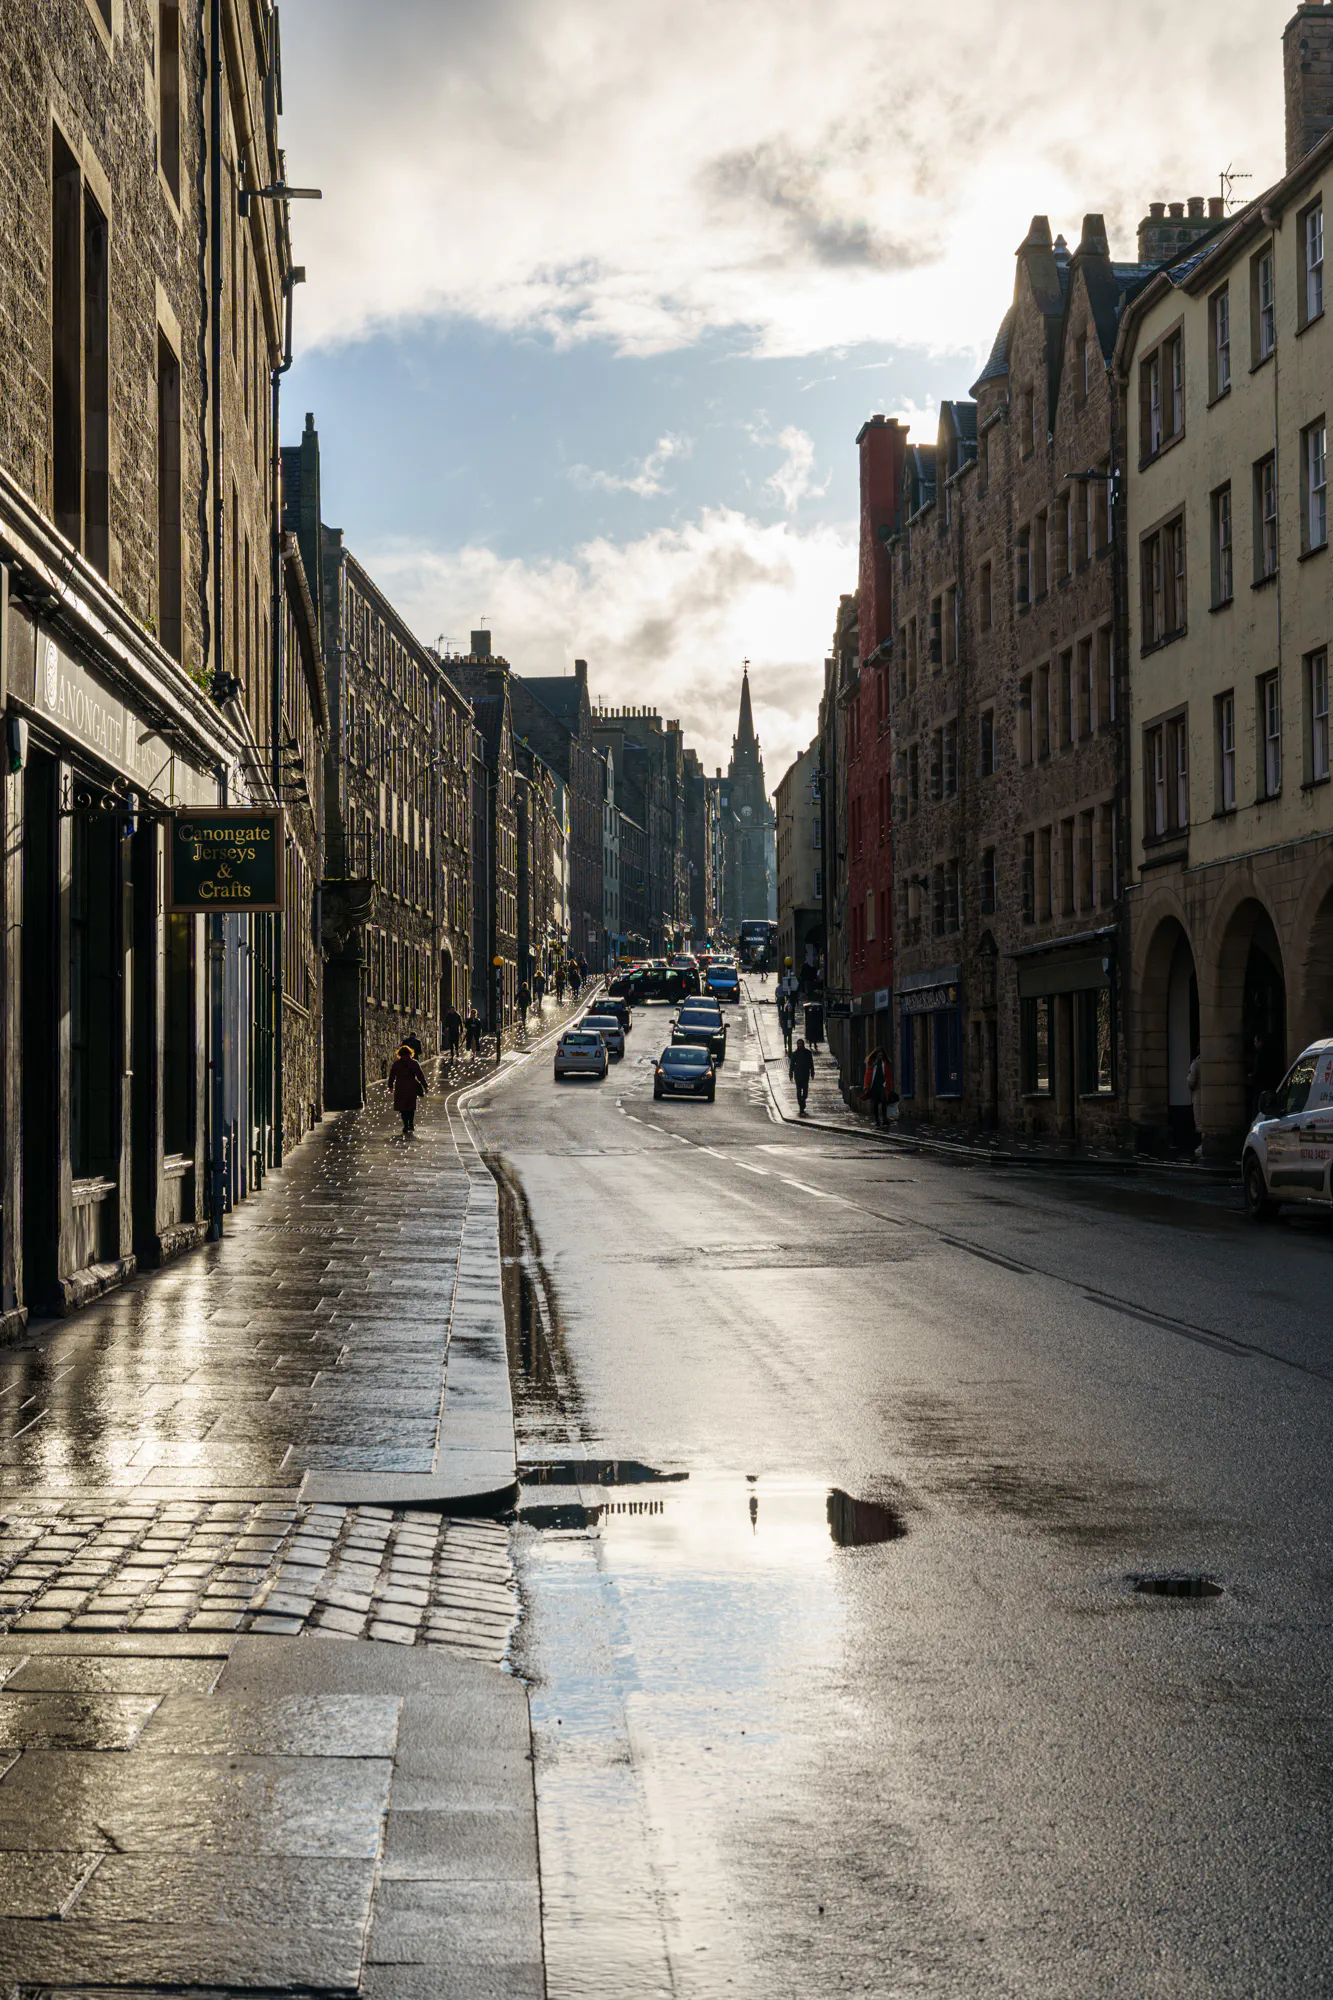 Looking up Canongate